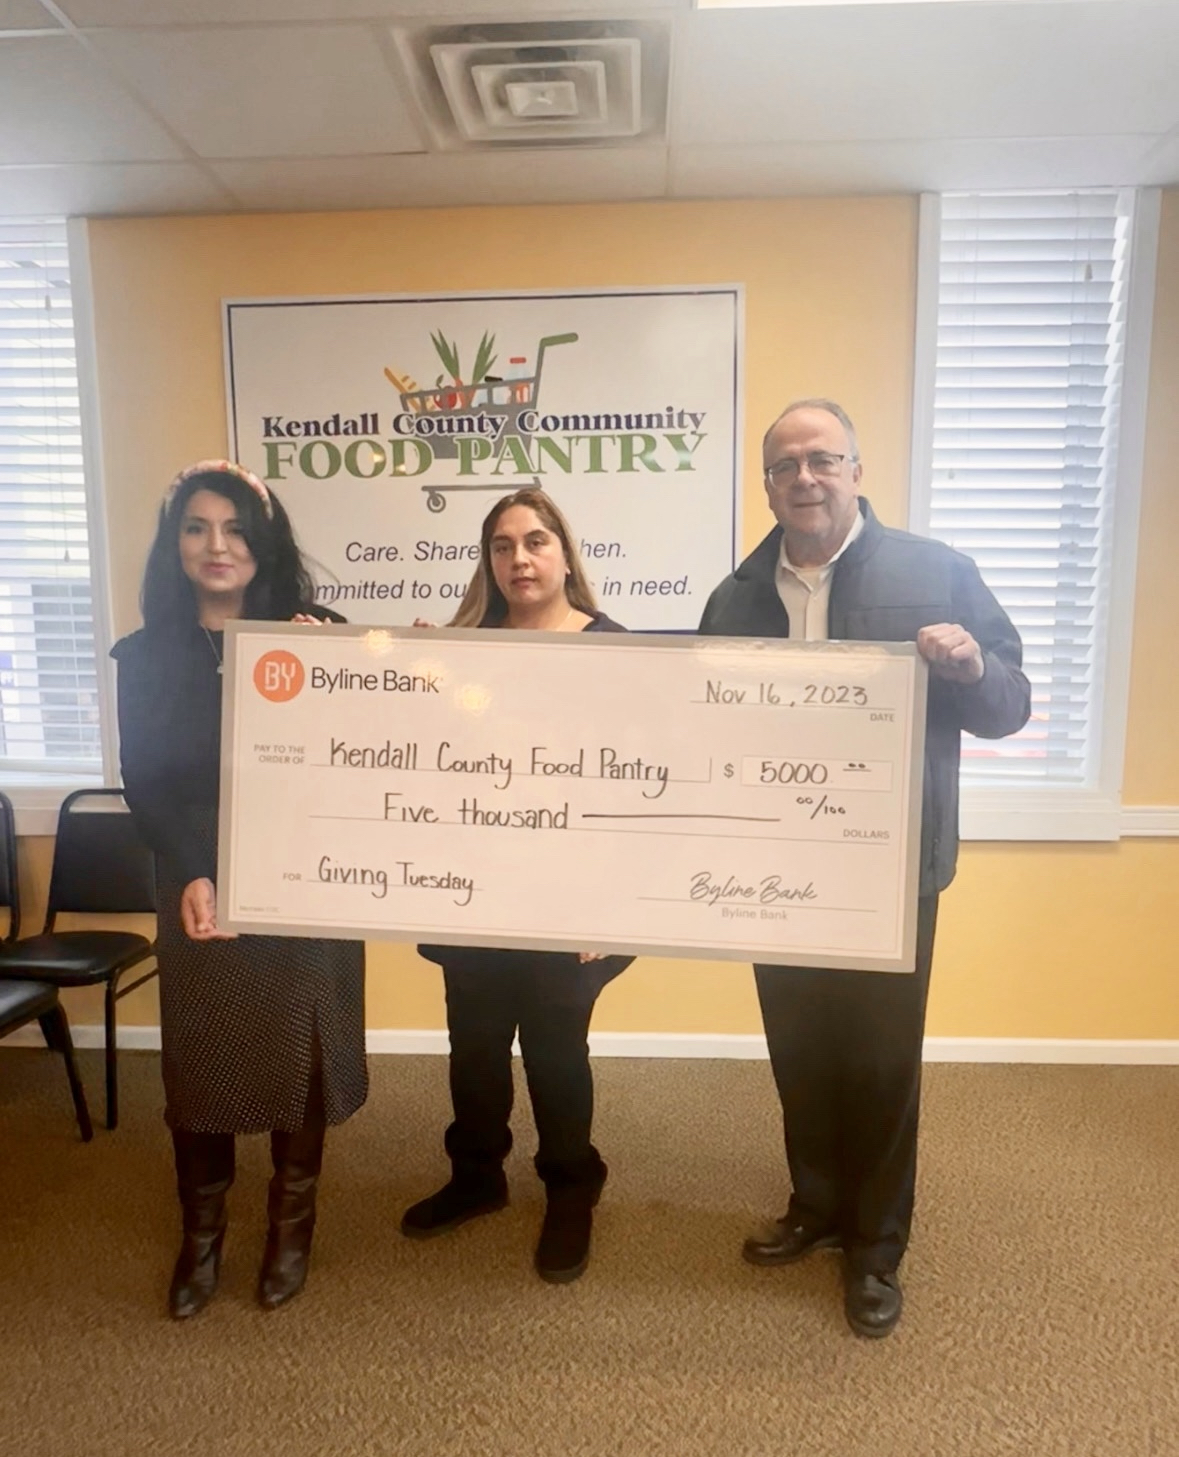 Dulce Vargas (center), Kendall County Community Food Pantry assistant director, receives a Giving Tuesday donation from Soledad Gaytan (left), manager of the Byline Bank Oswego branch, and Ken Holmstrom, Byline Bank Oswego market president.